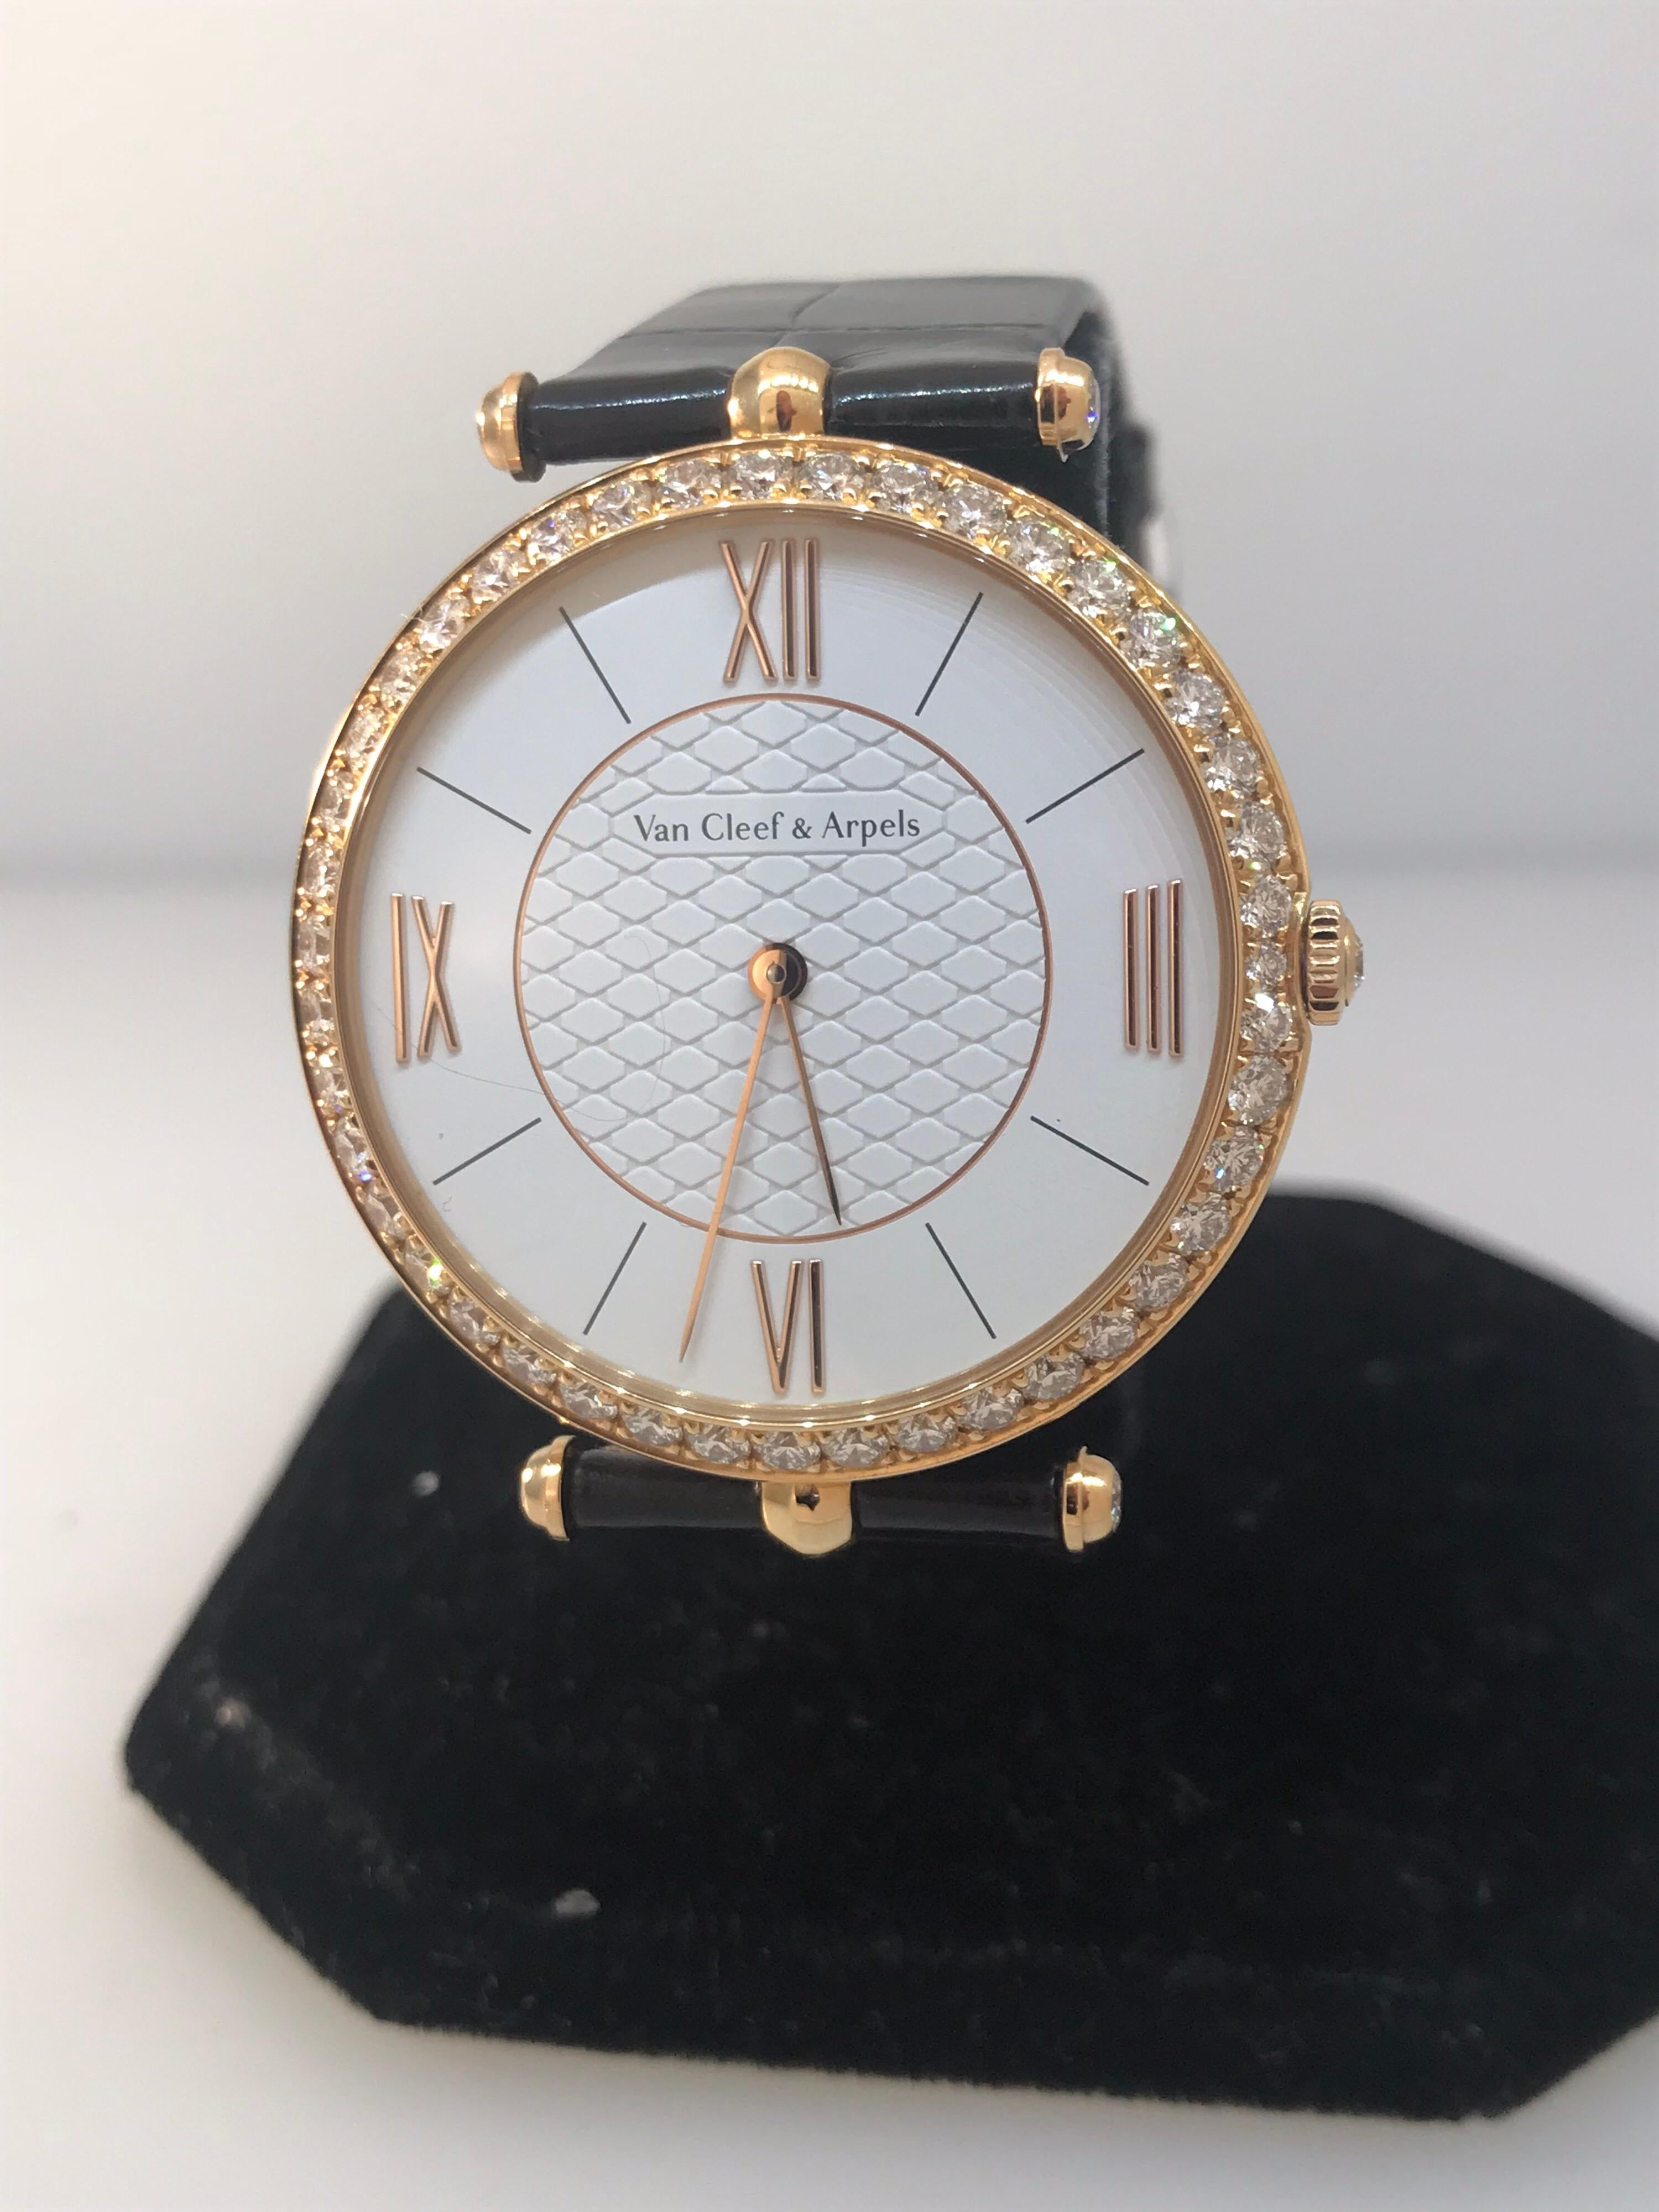 Van Cleef & Arpels Pierre Arpels Rose Gold Diamond Bezel Watch VCARO3GL00 In Excellent Condition For Sale In New York, NY